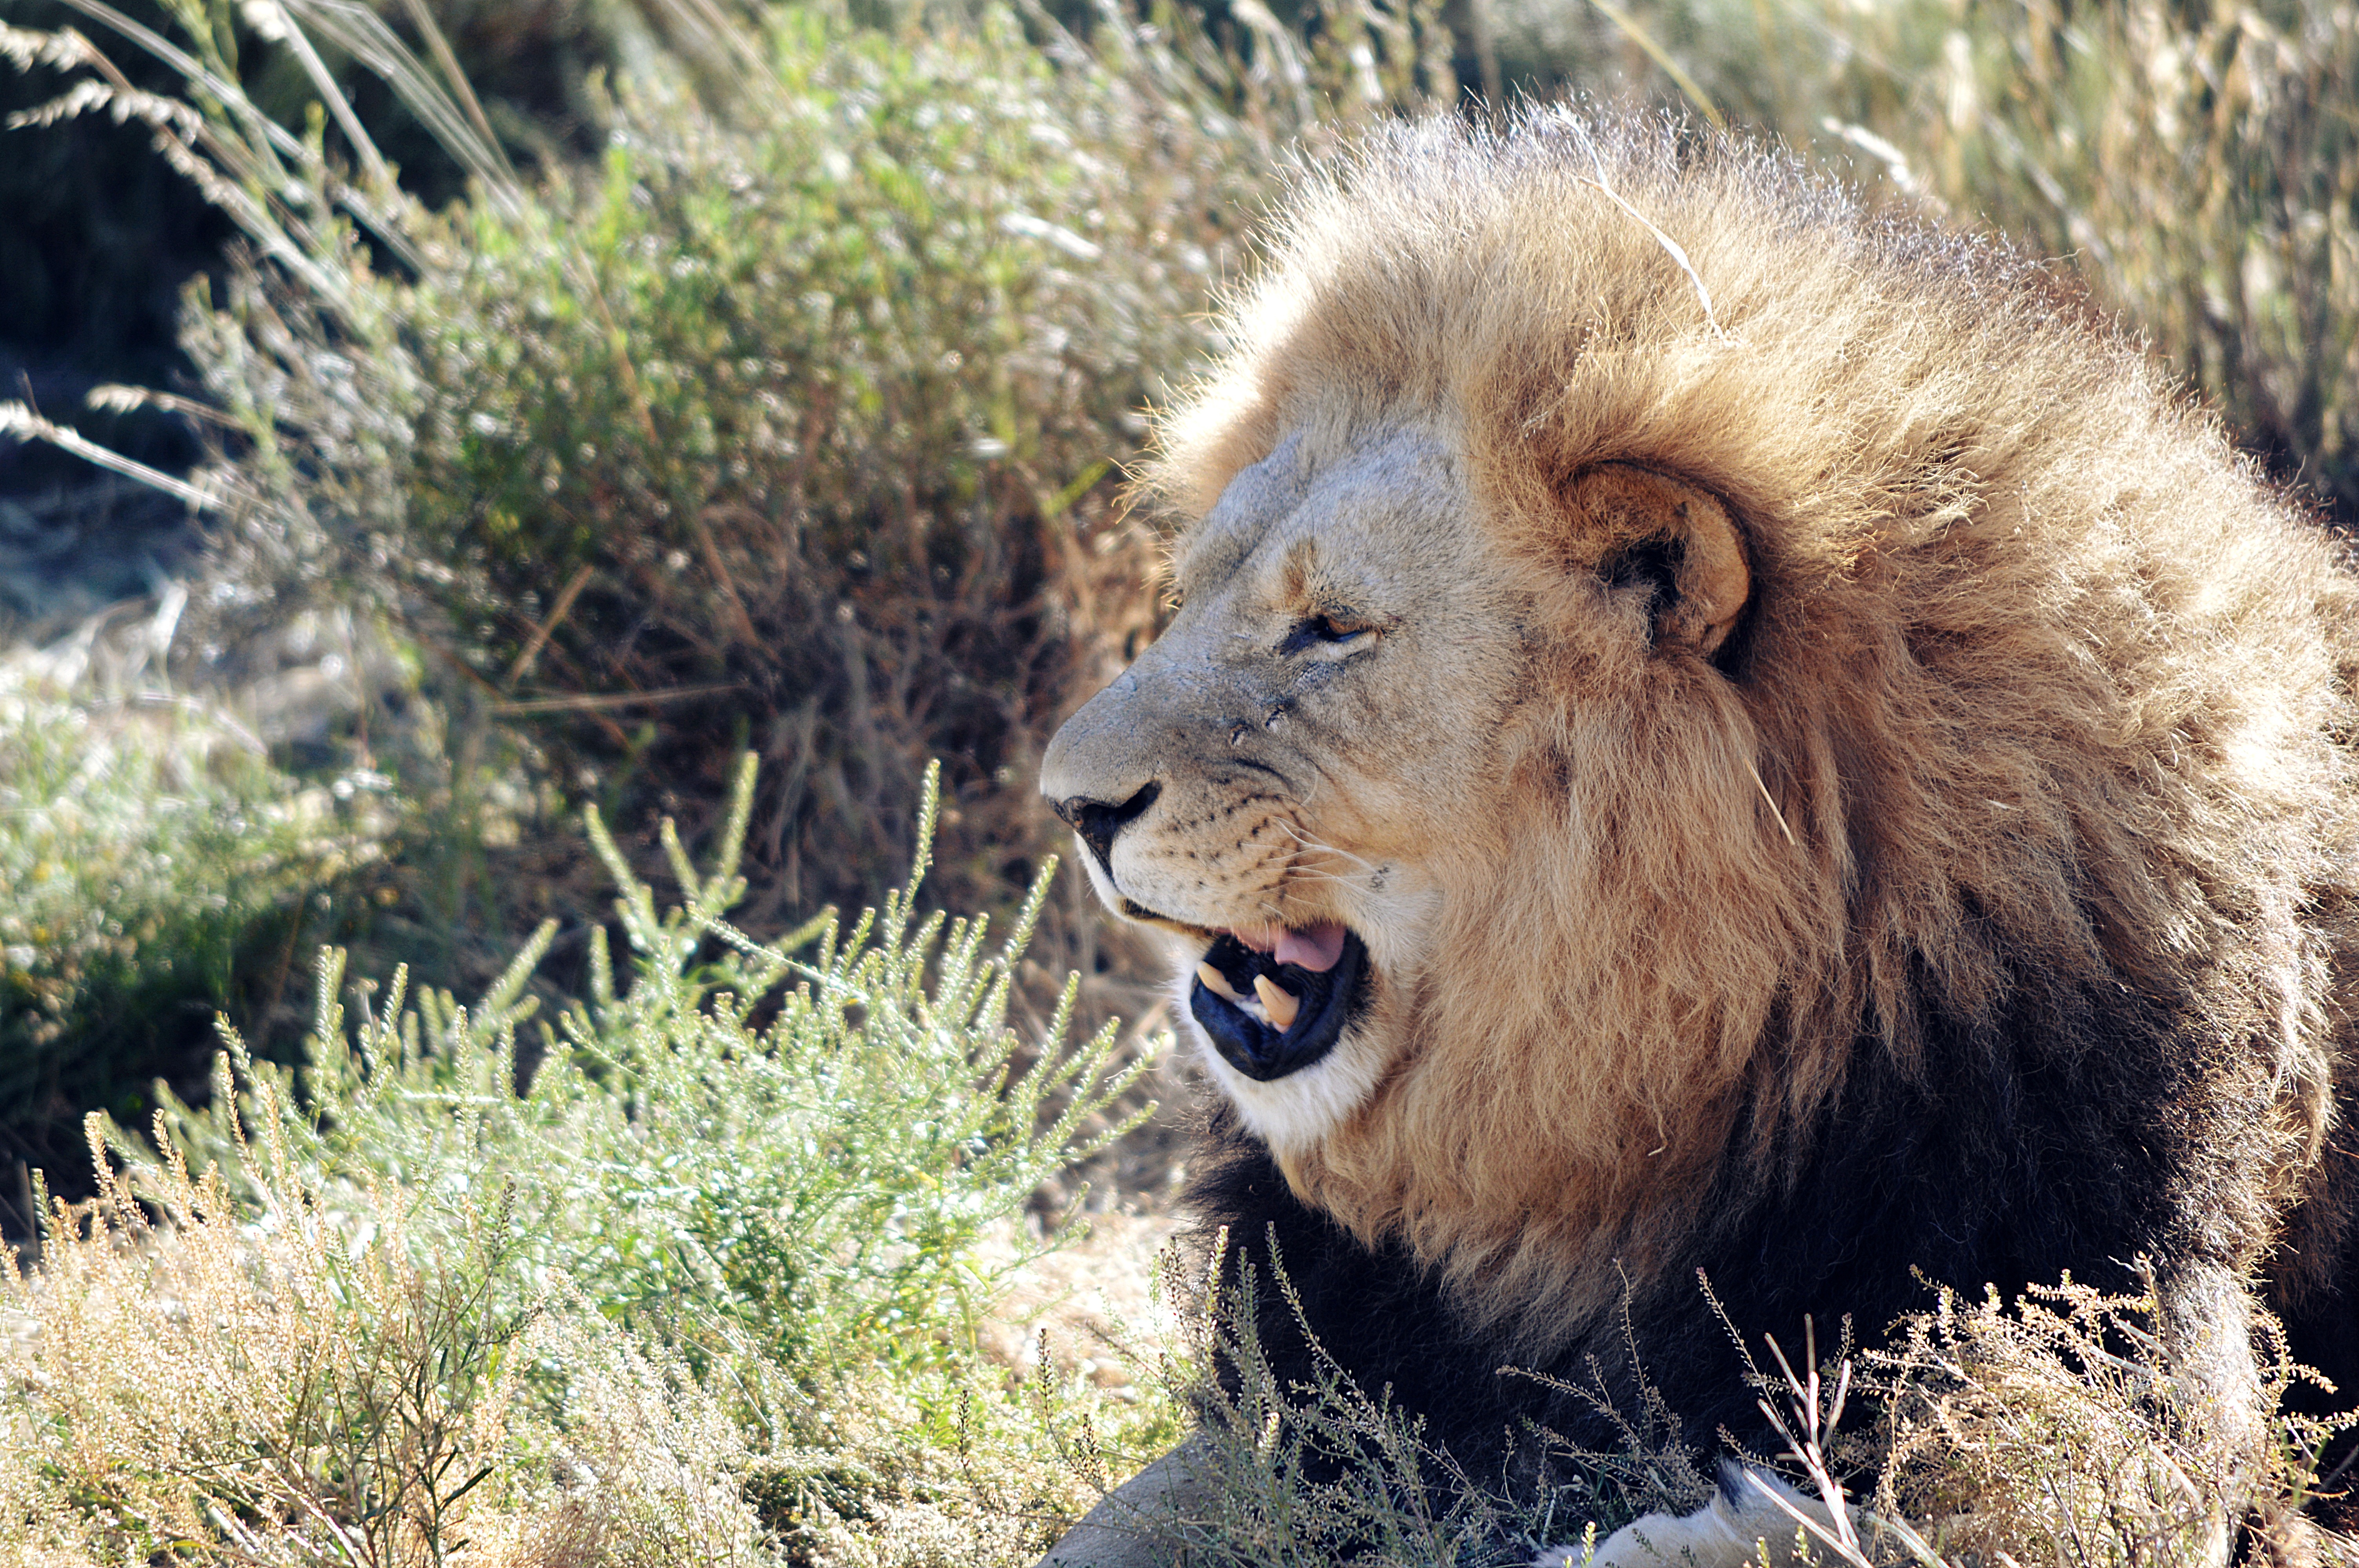 Fluffy lion with open mouth free image download